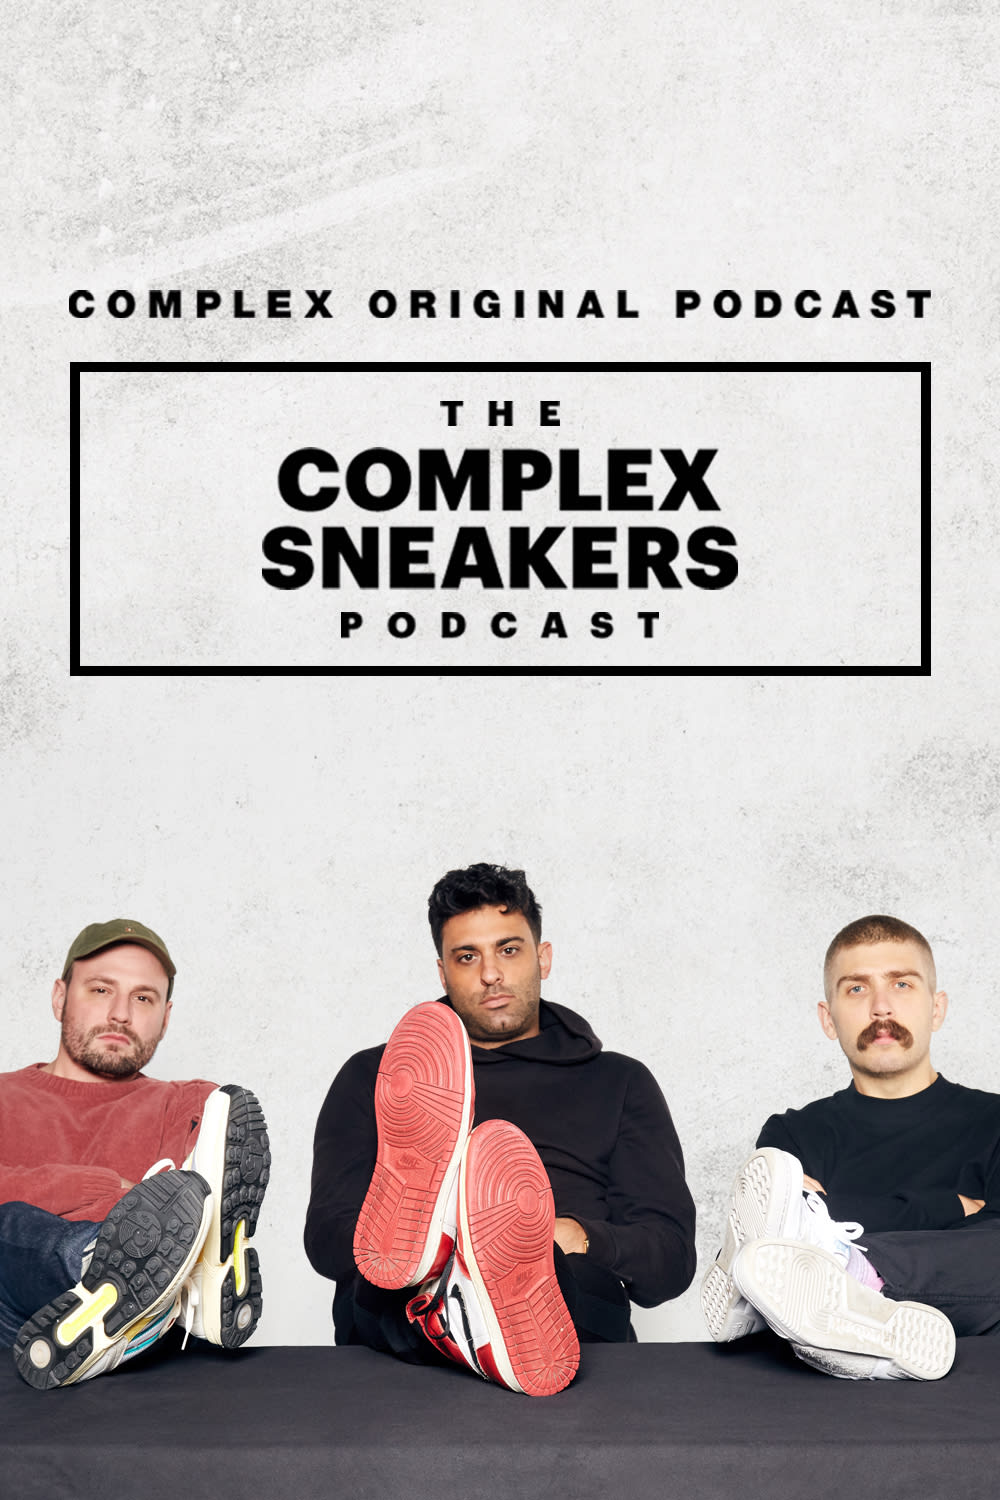 The Complex Sneakers Podcast Show